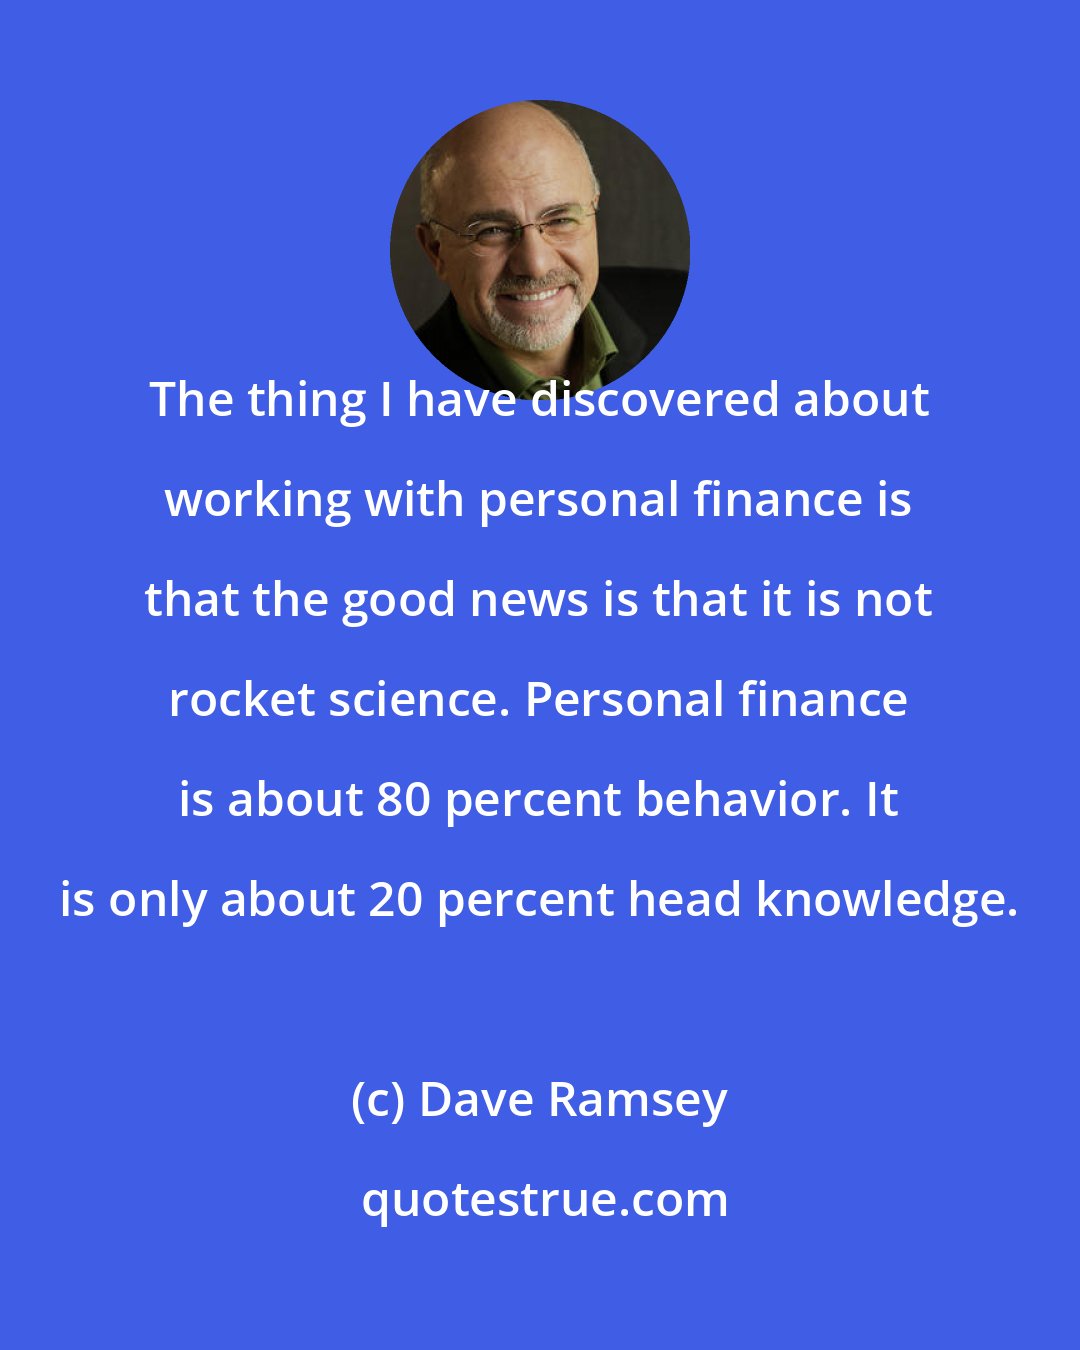 Dave Ramsey: The thing I have discovered about working with personal finance is that the good news is that it is not rocket science. Personal finance is about 80 percent behavior. It is only about 20 percent head knowledge.